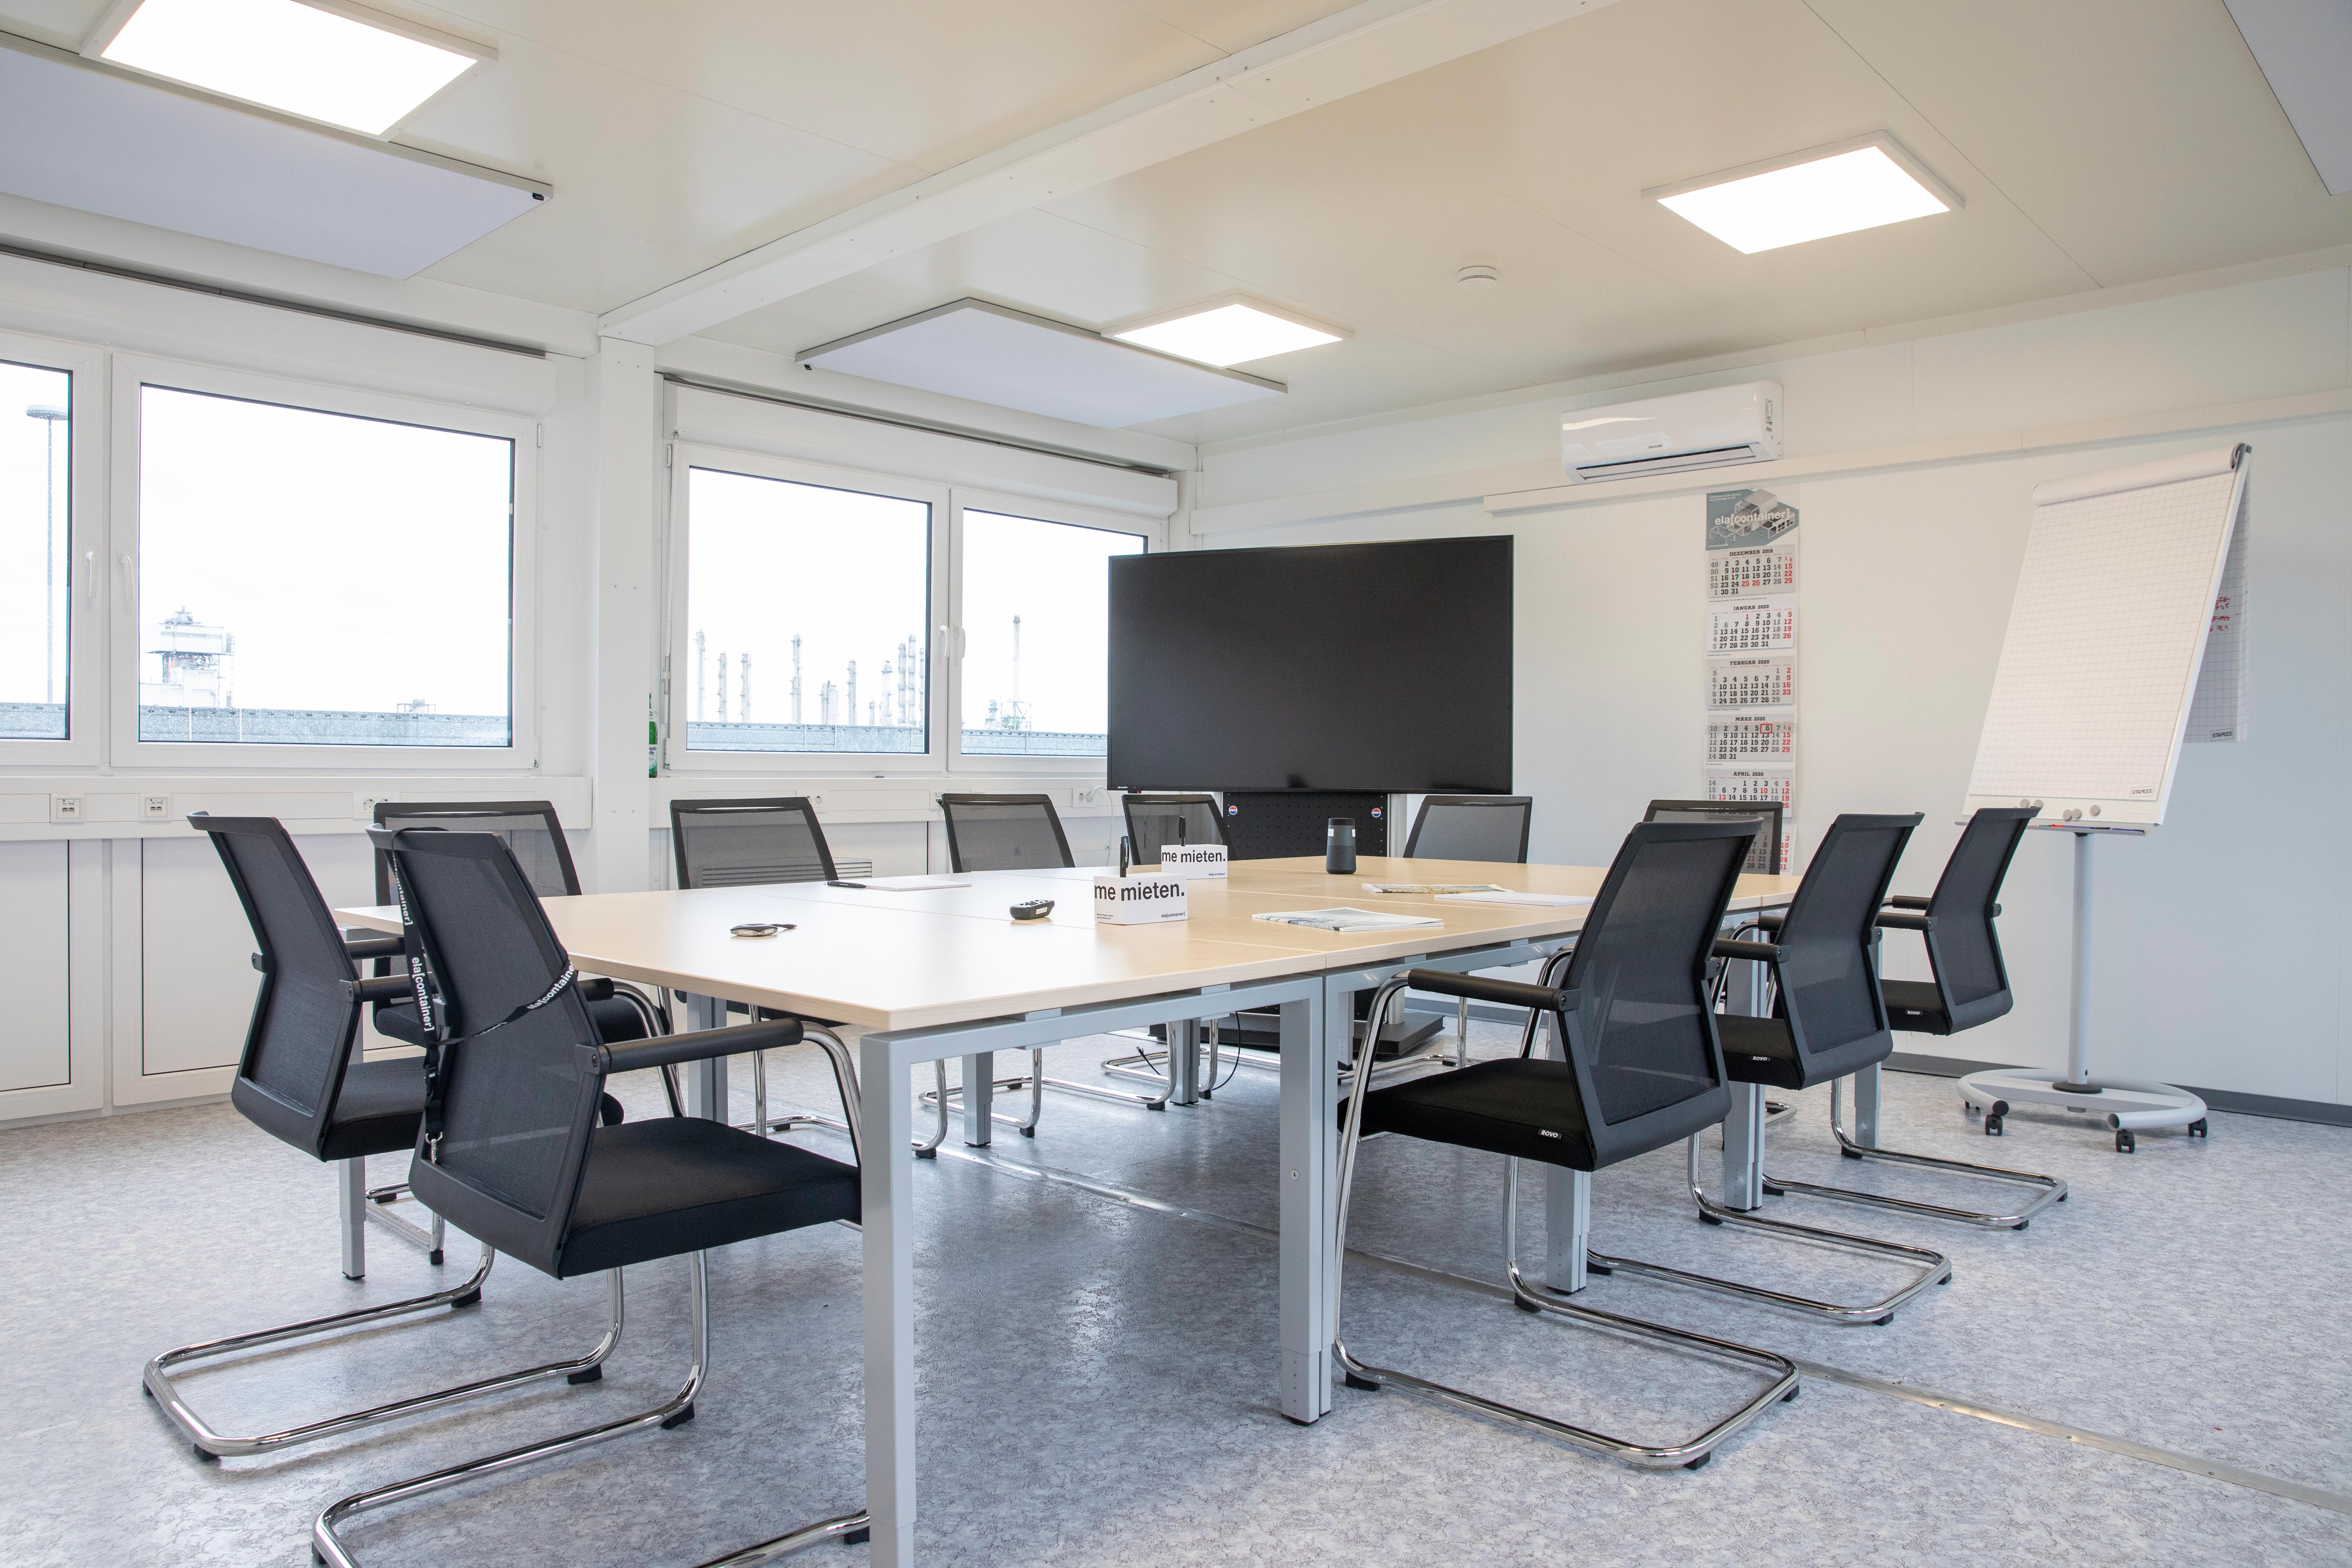 Spacious meeting rooms in a bright atmosphere.